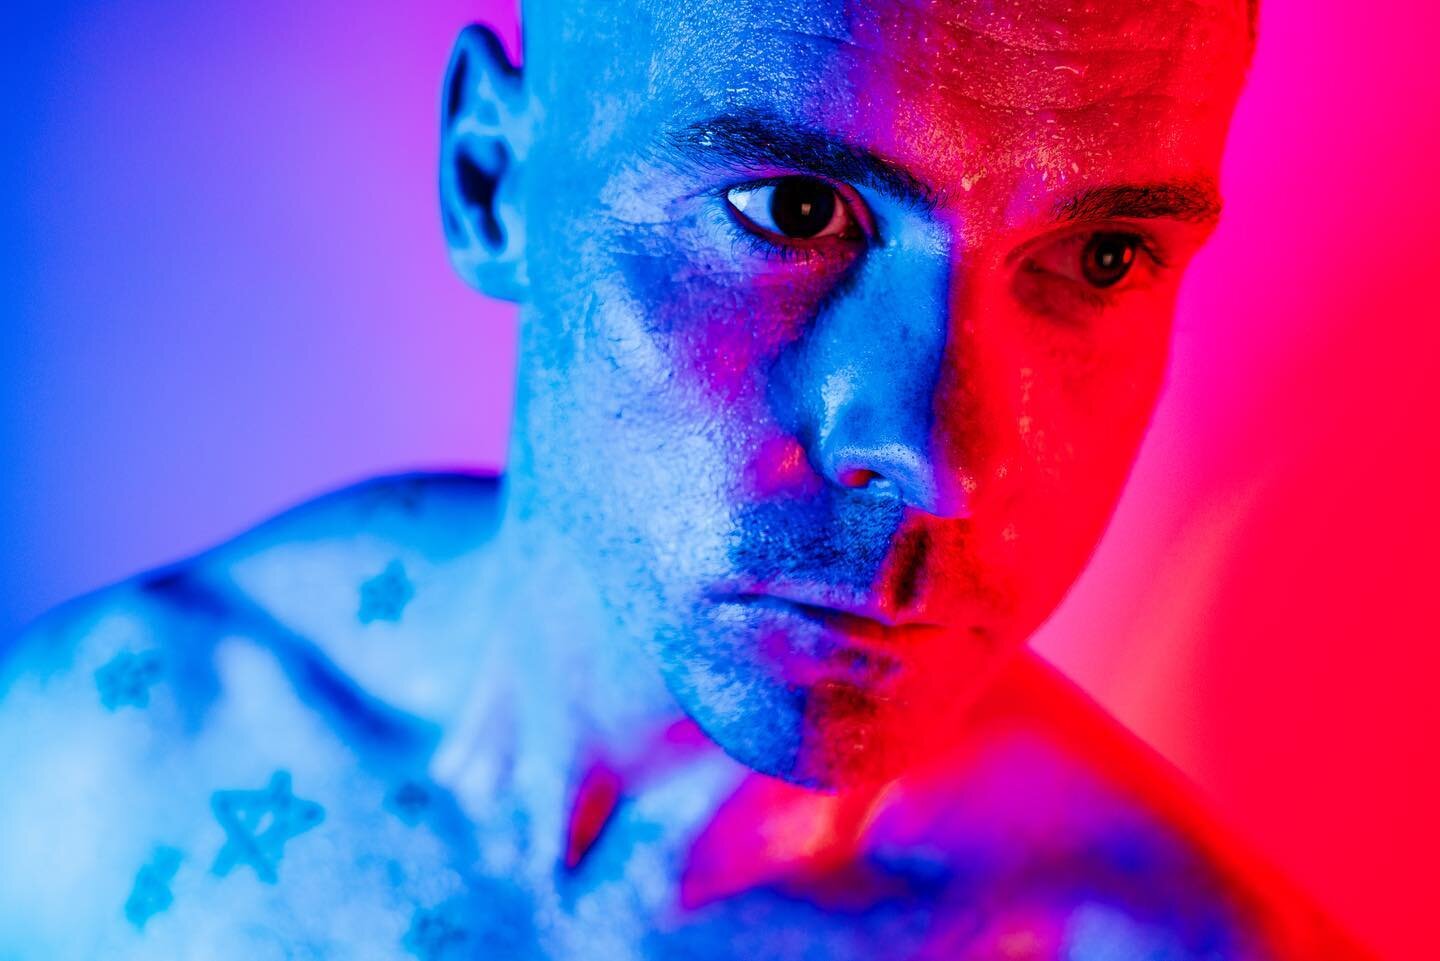 Neon glow
#photoshoot #nude 
#photography #portraitphotographer #portrait_mood 
#portrait_perfection #nikonphotography 
#portinspired #edit_perfection 
#underwearmodel #underwearshoot 
#photographyisart #fitness #fitnessmotivation #fit #neon #neonpho